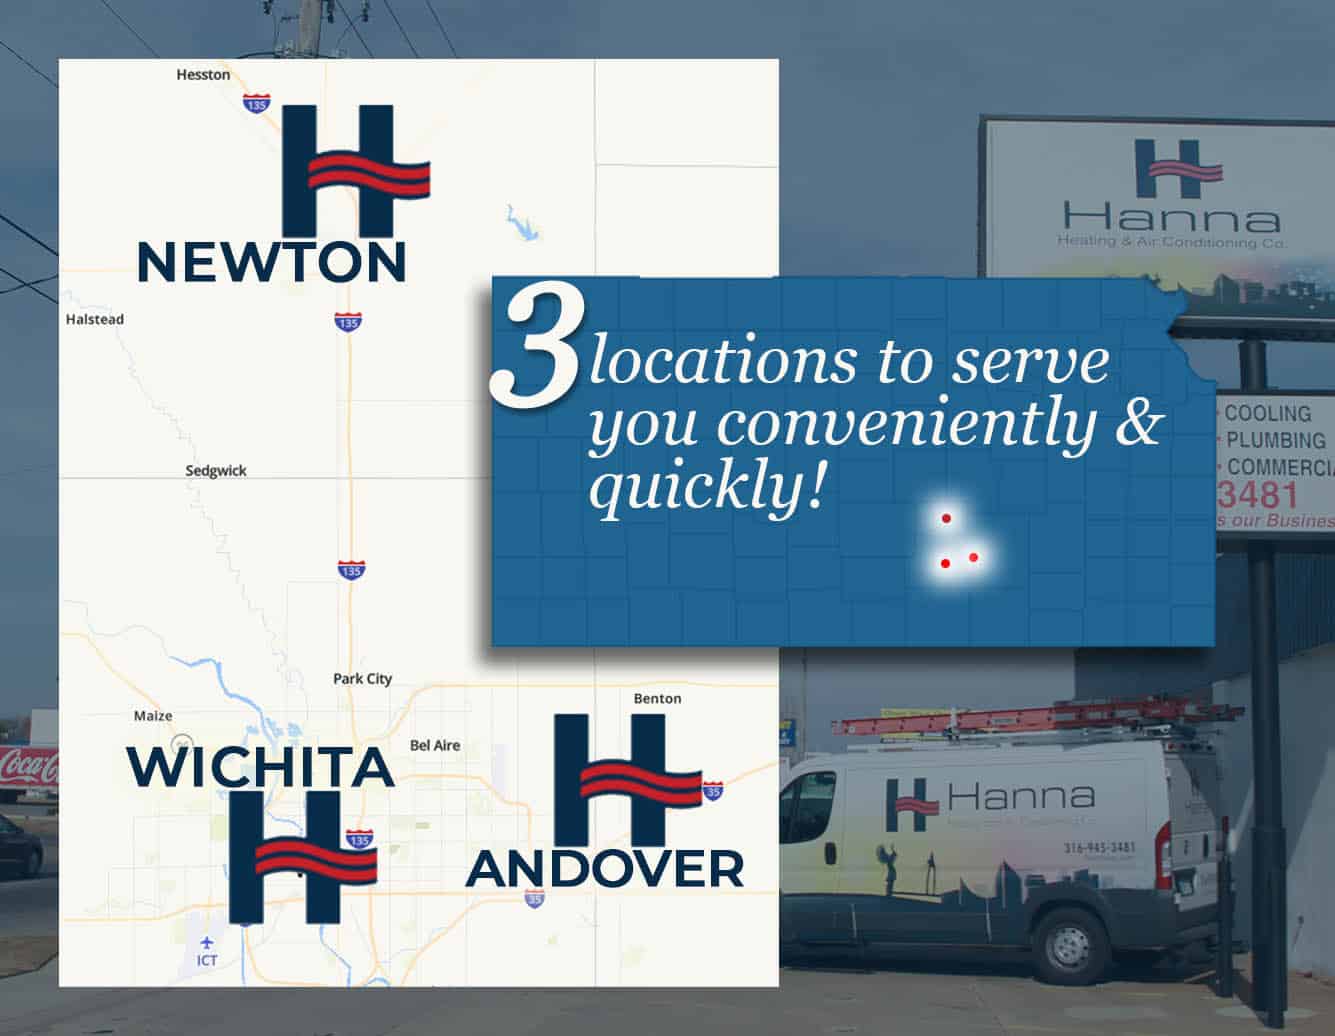 3 locations map to provide quick emergency furnace and AC repair in Newton, Wichita and Andover Kansas